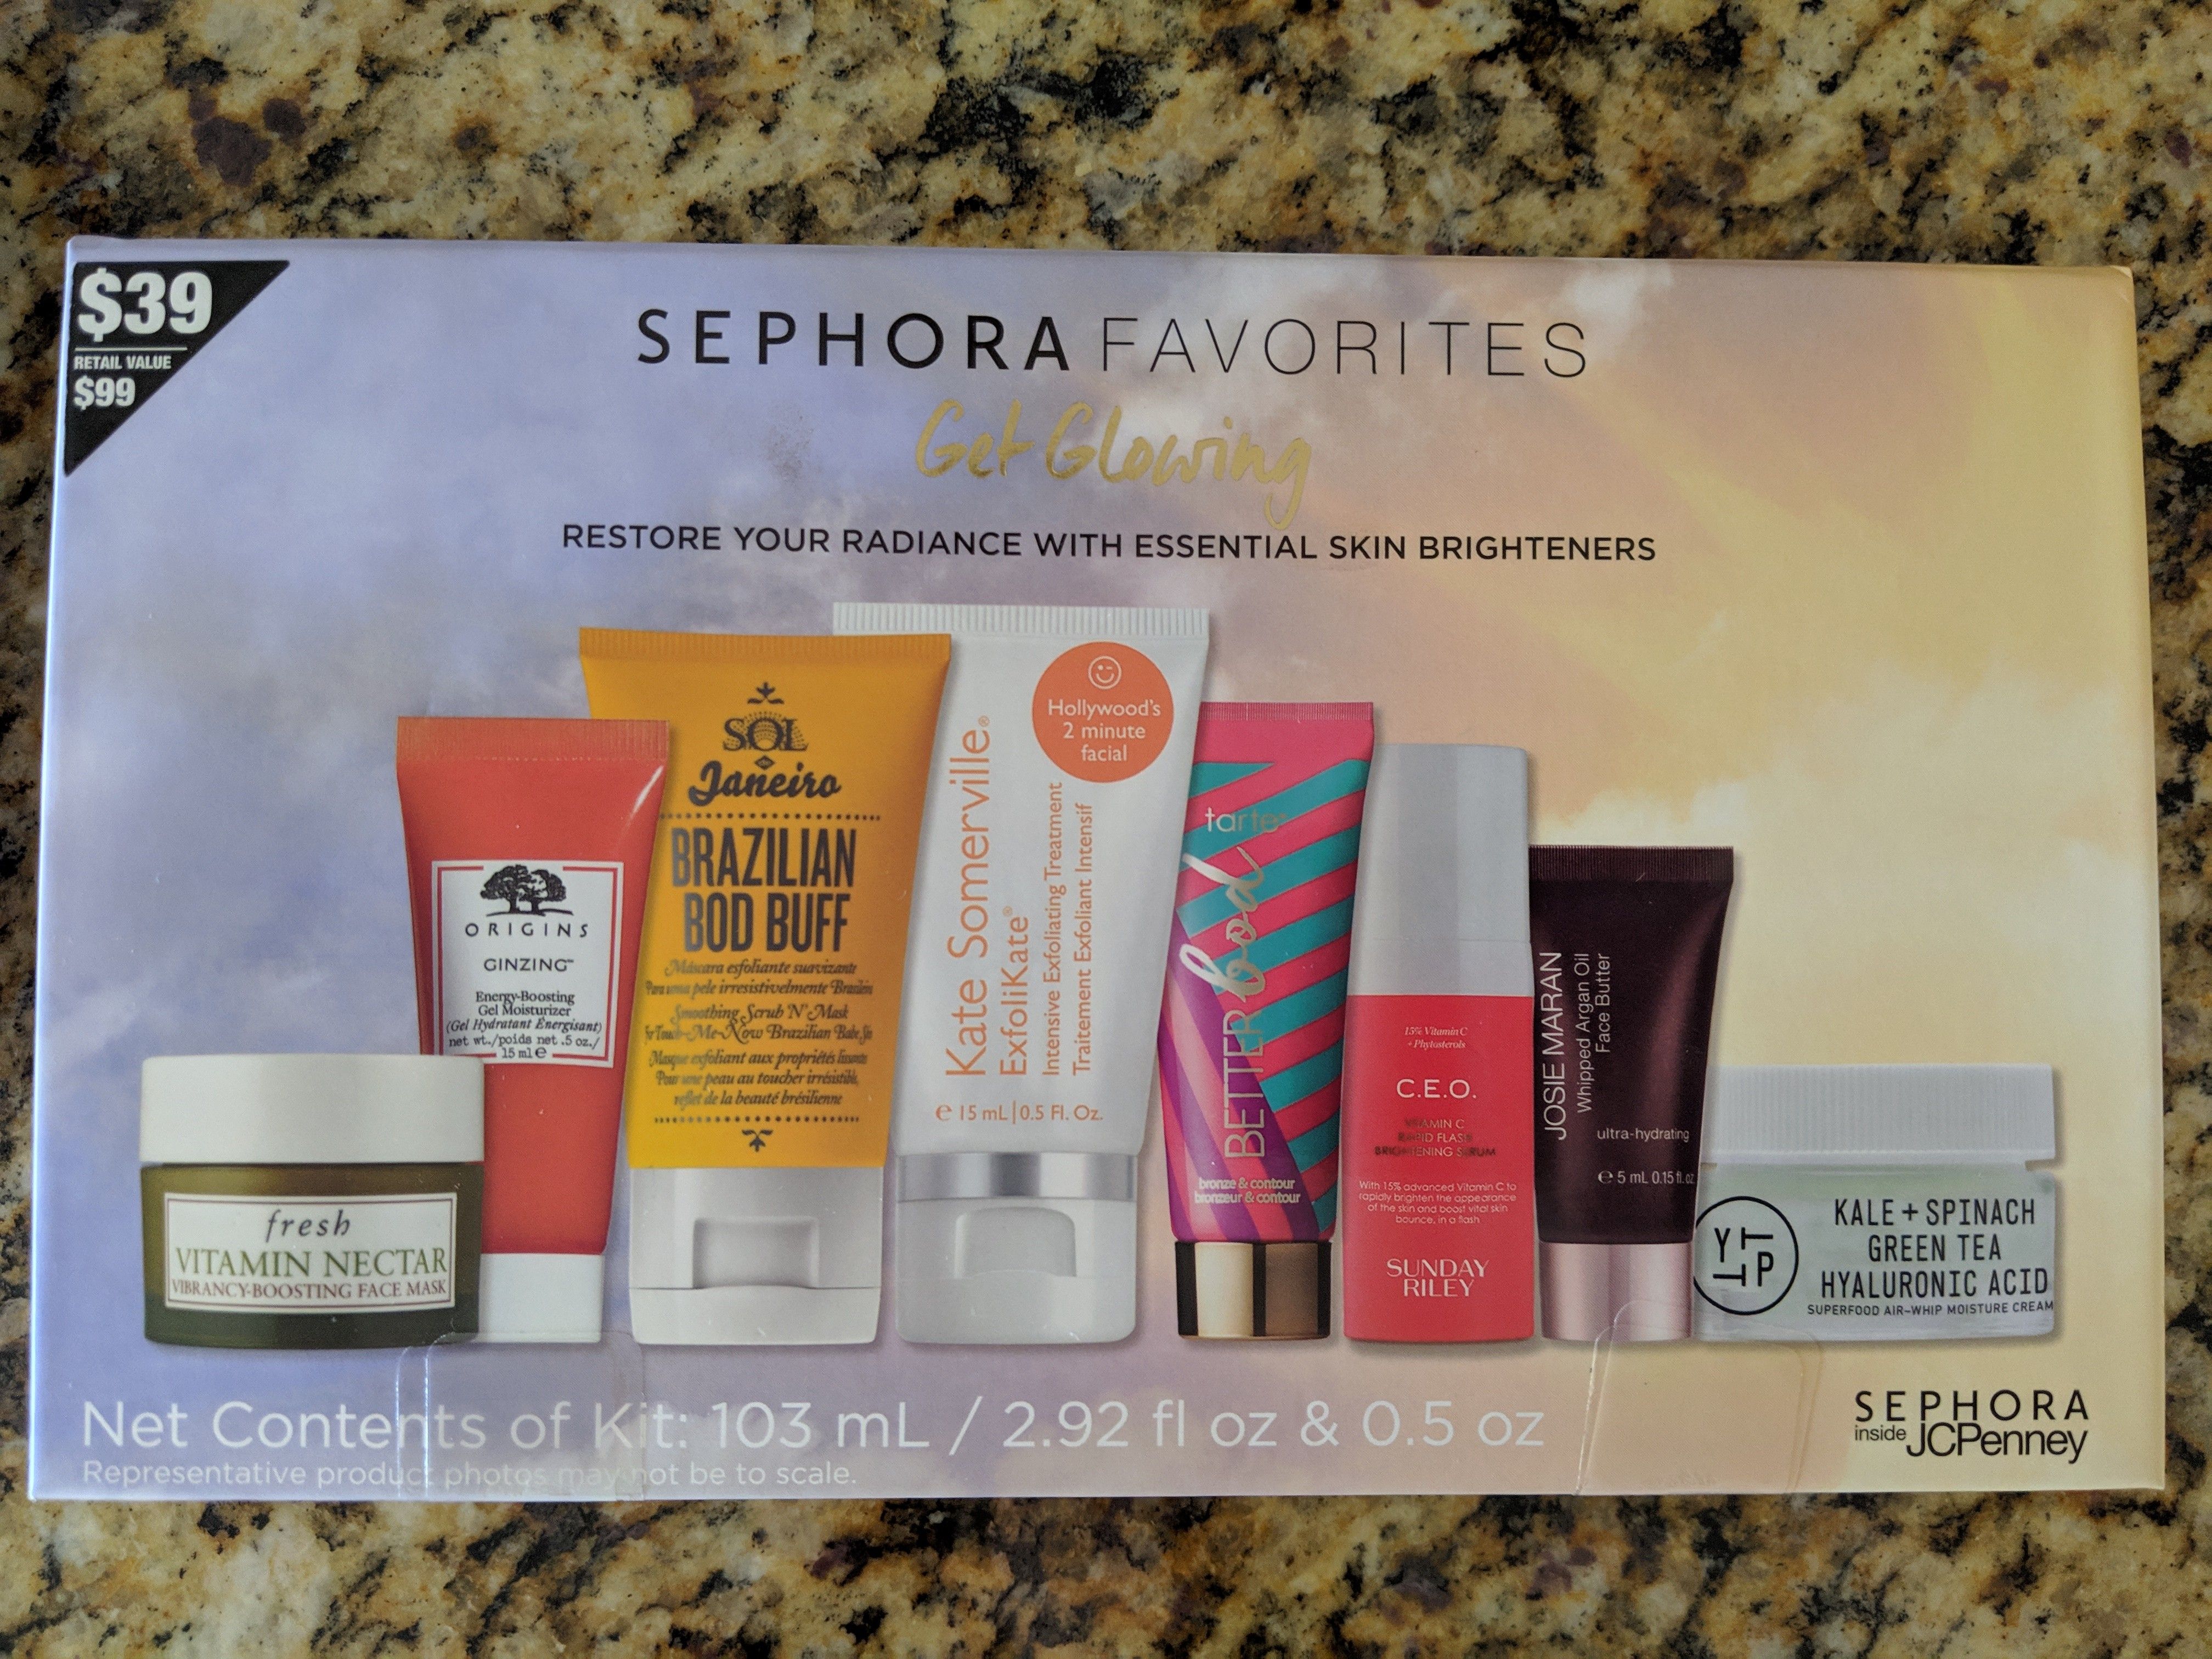 sephora in jcpenney